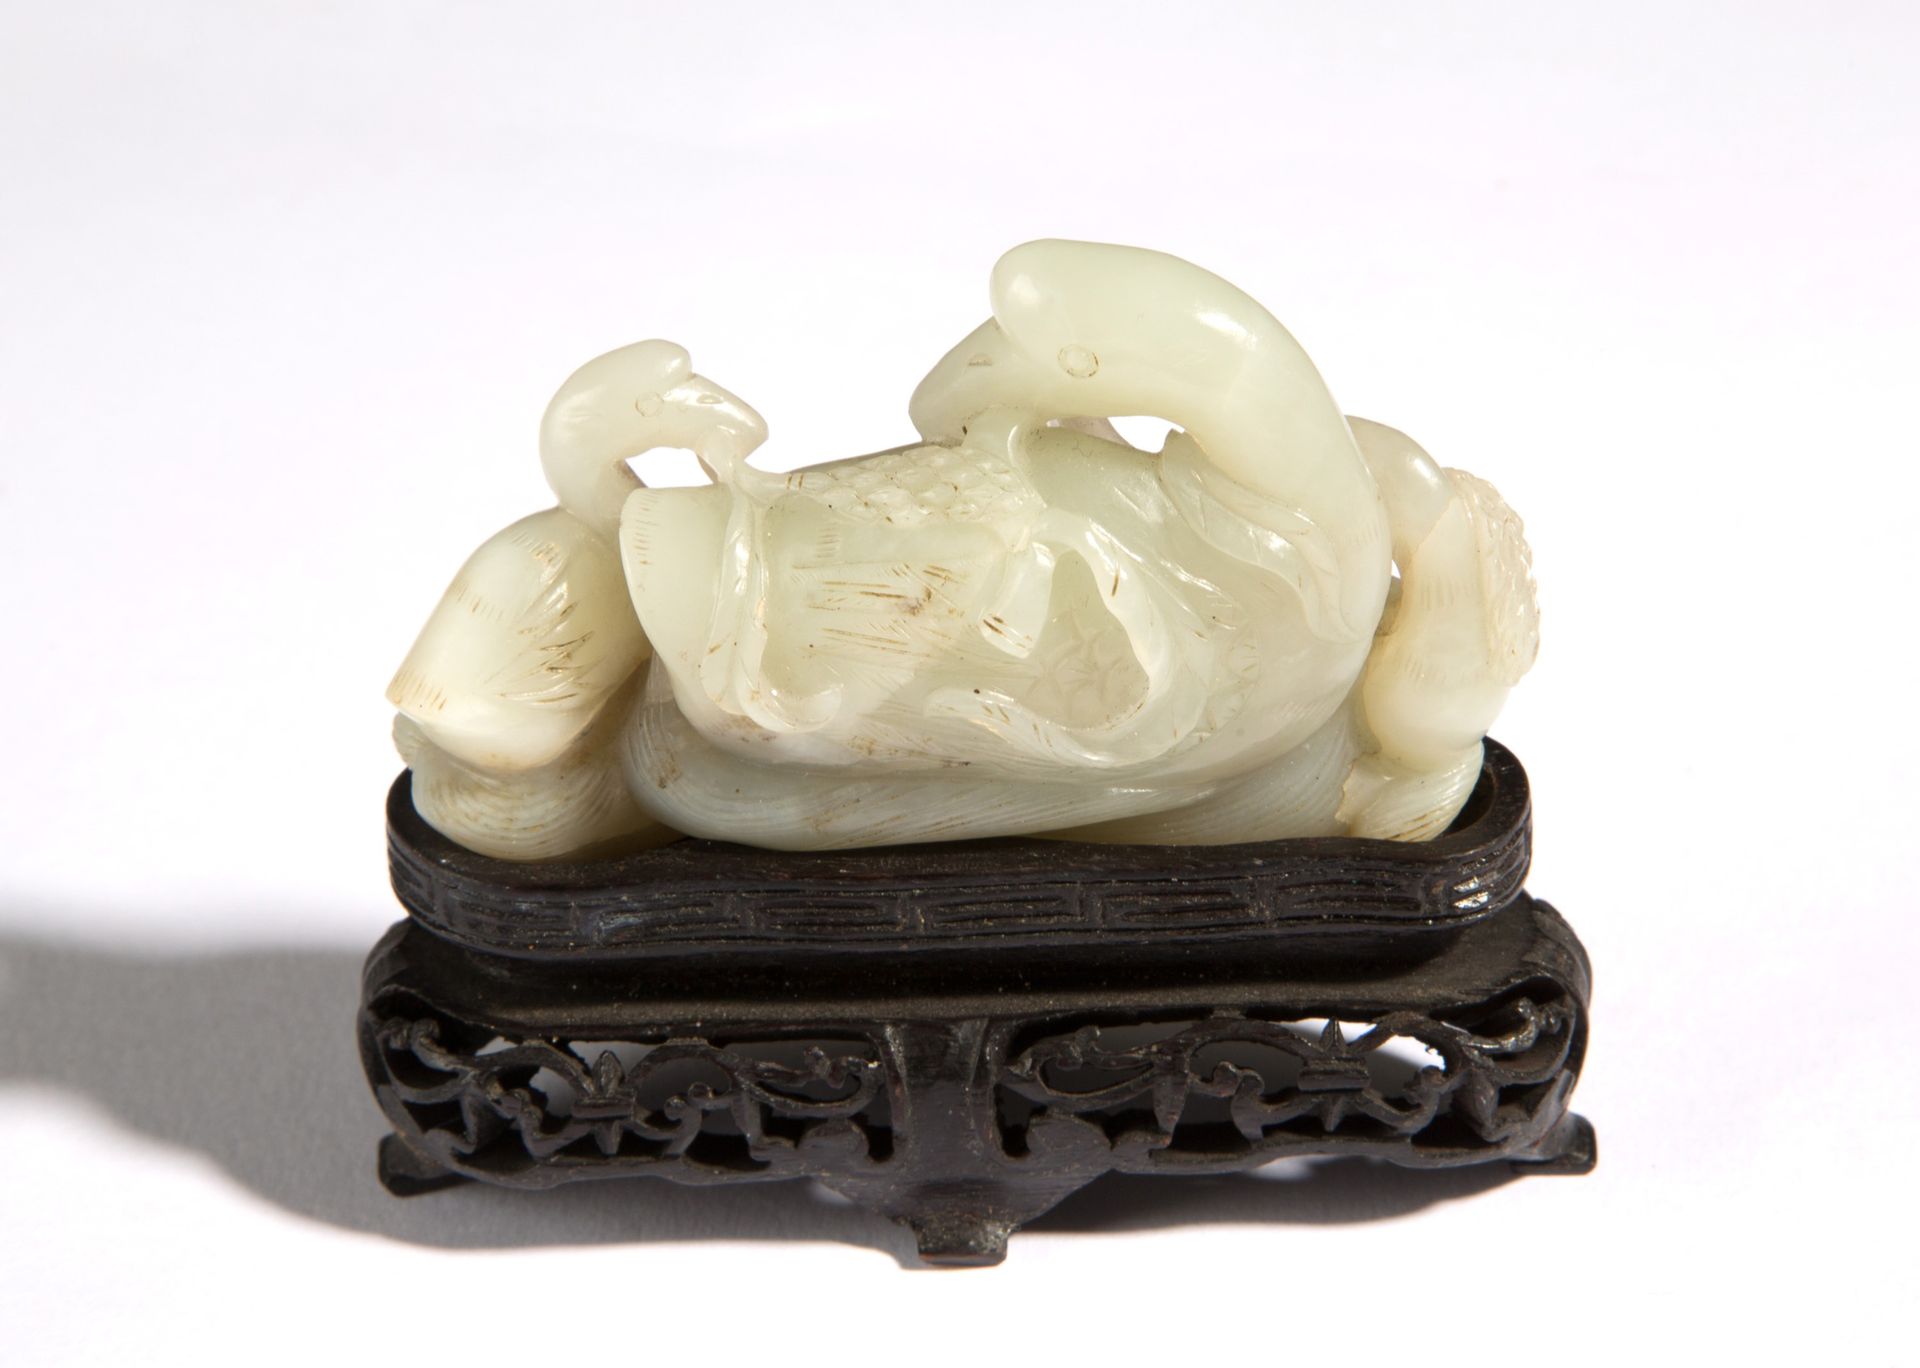 Jade swans White jade sculpture depicting "FAMILY OF SWANS." Wooden base. China.&hellip;